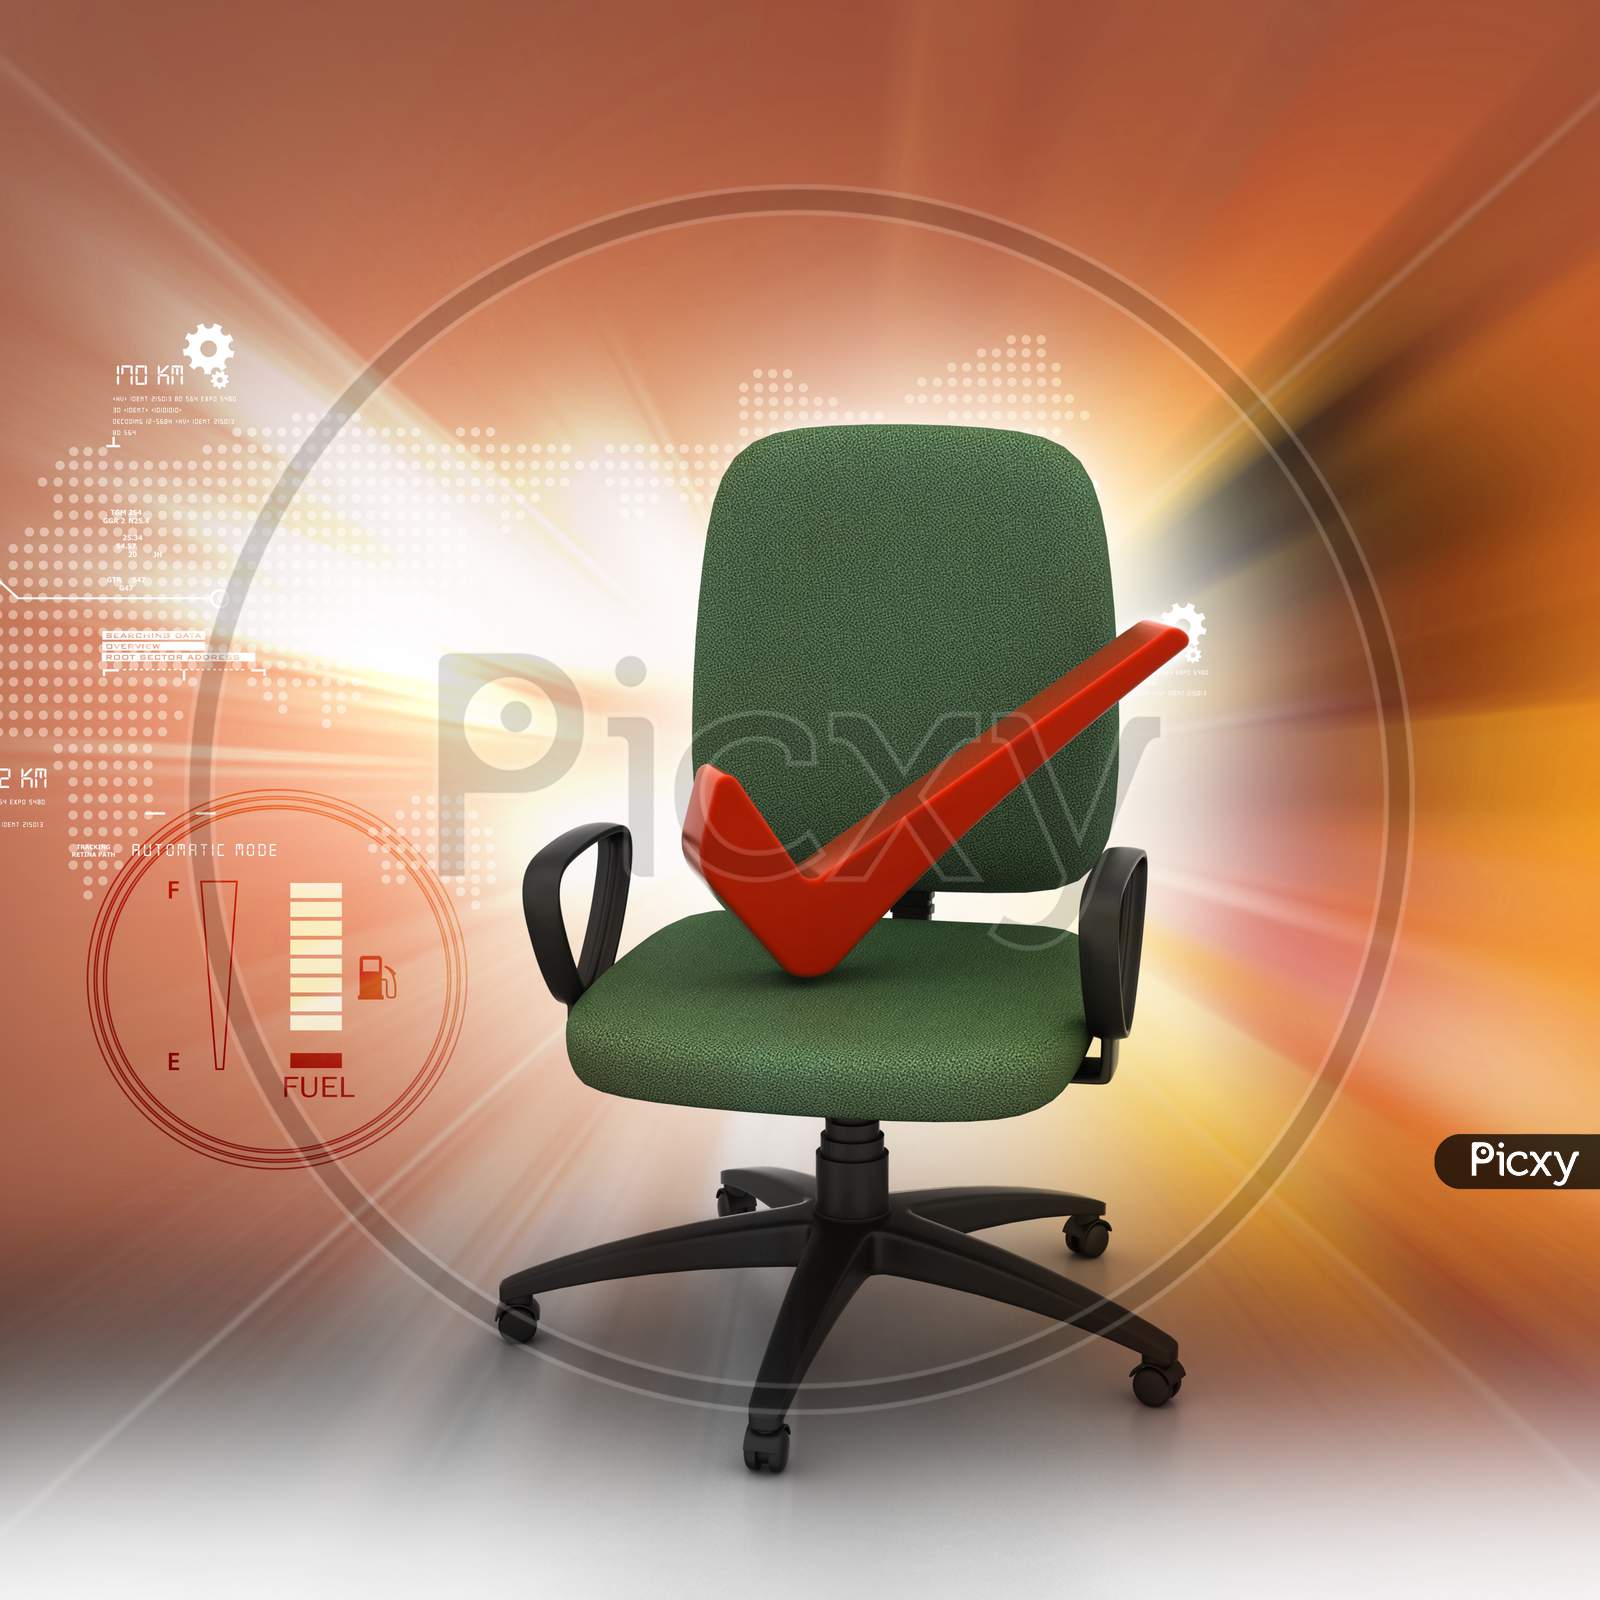 An Office Chair with Red Ticked Mark